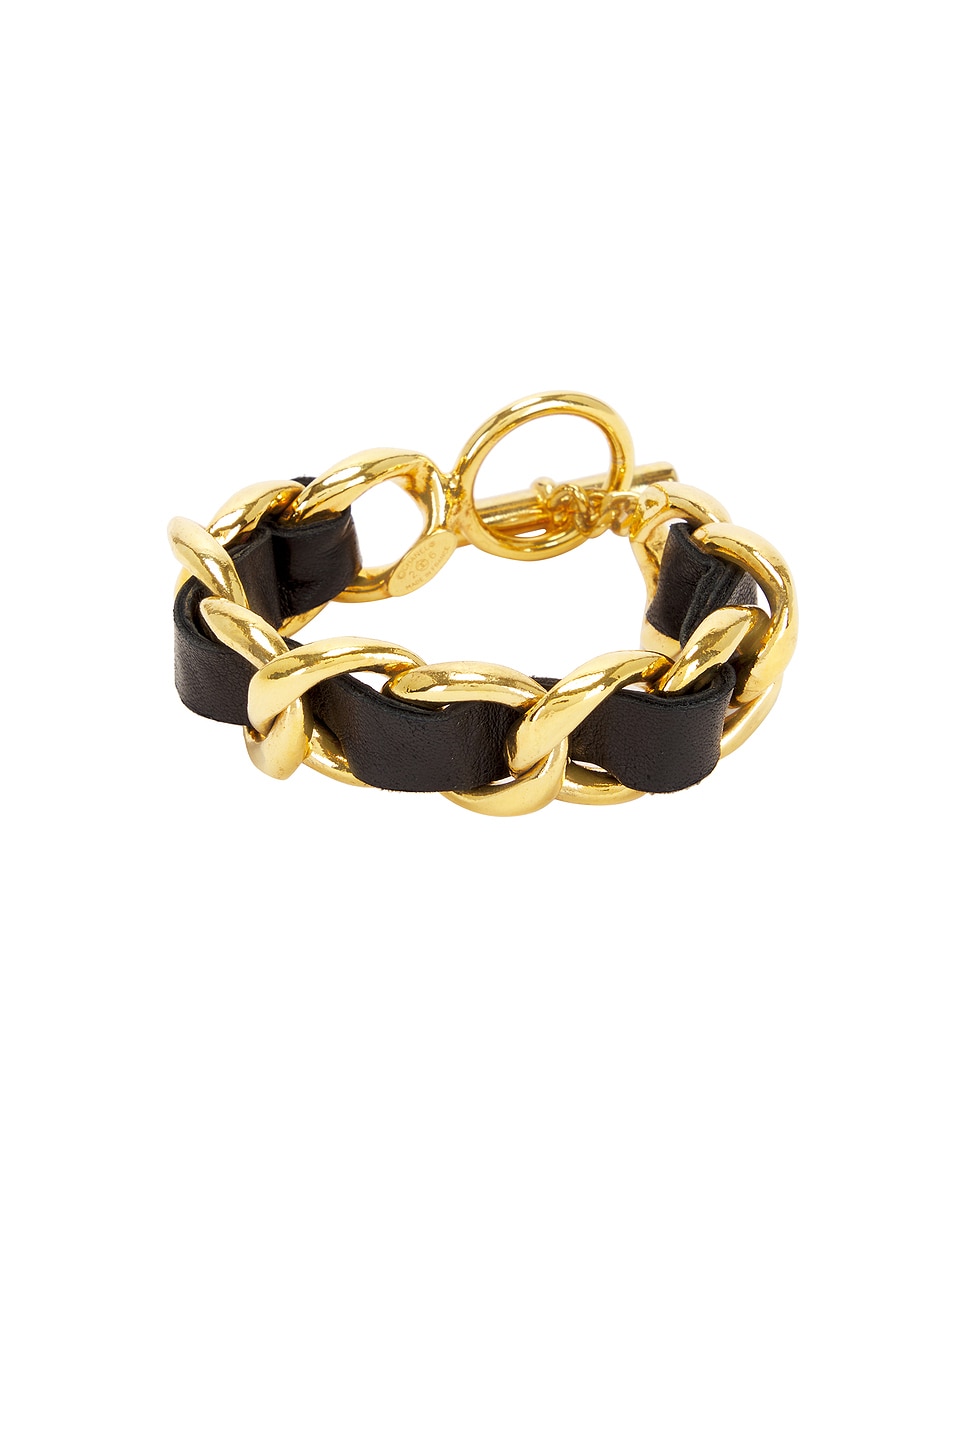 Image 1 of FWRD Renew Chanel Leather Chain Bracelet in Gold